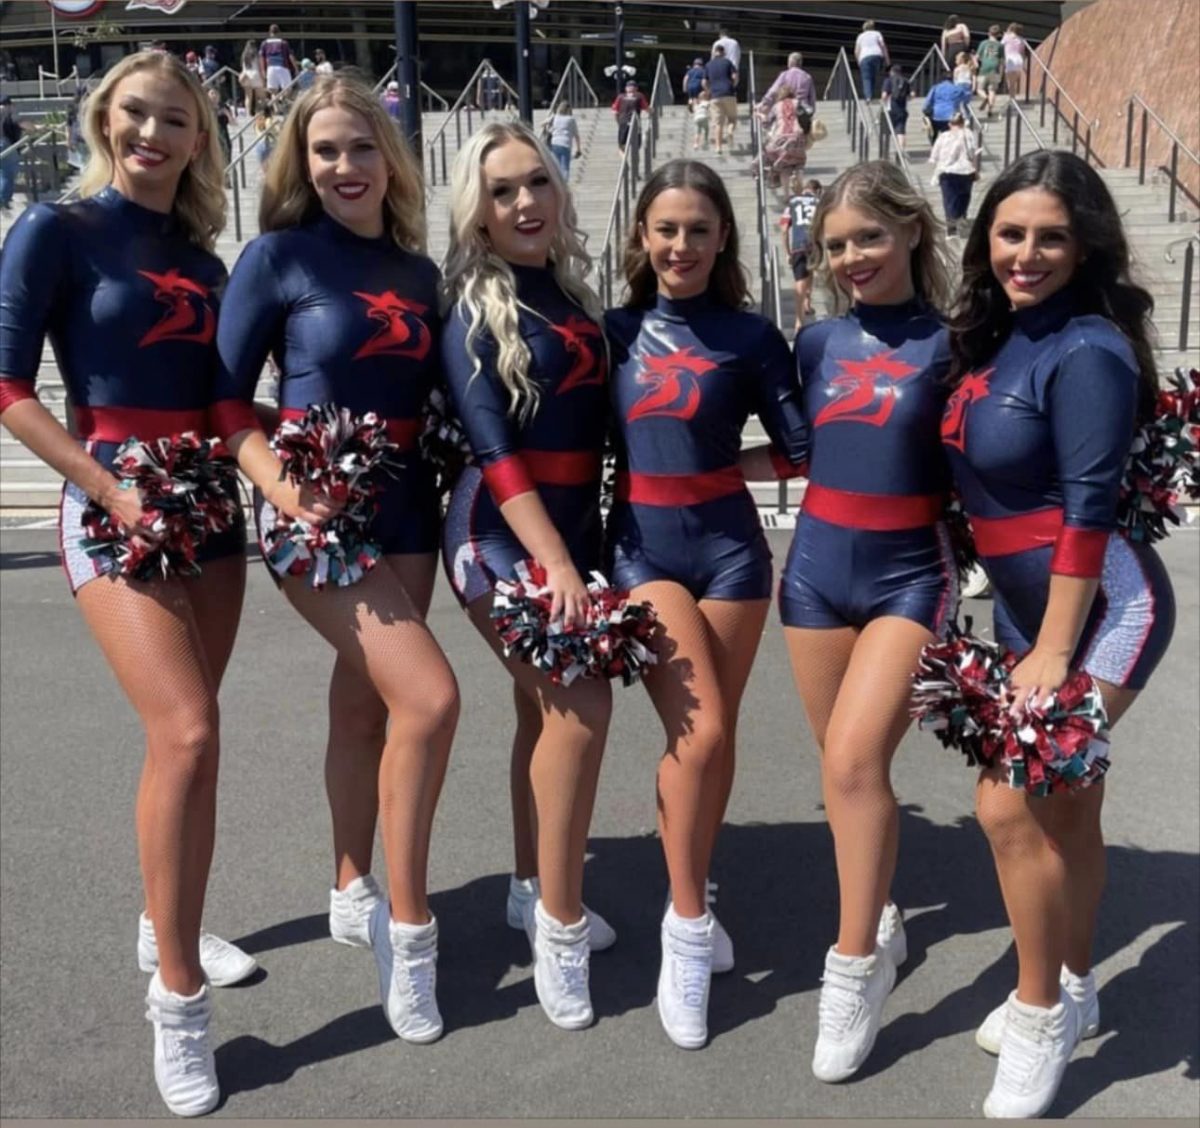 Six Roosters cheerleaders with pom poms